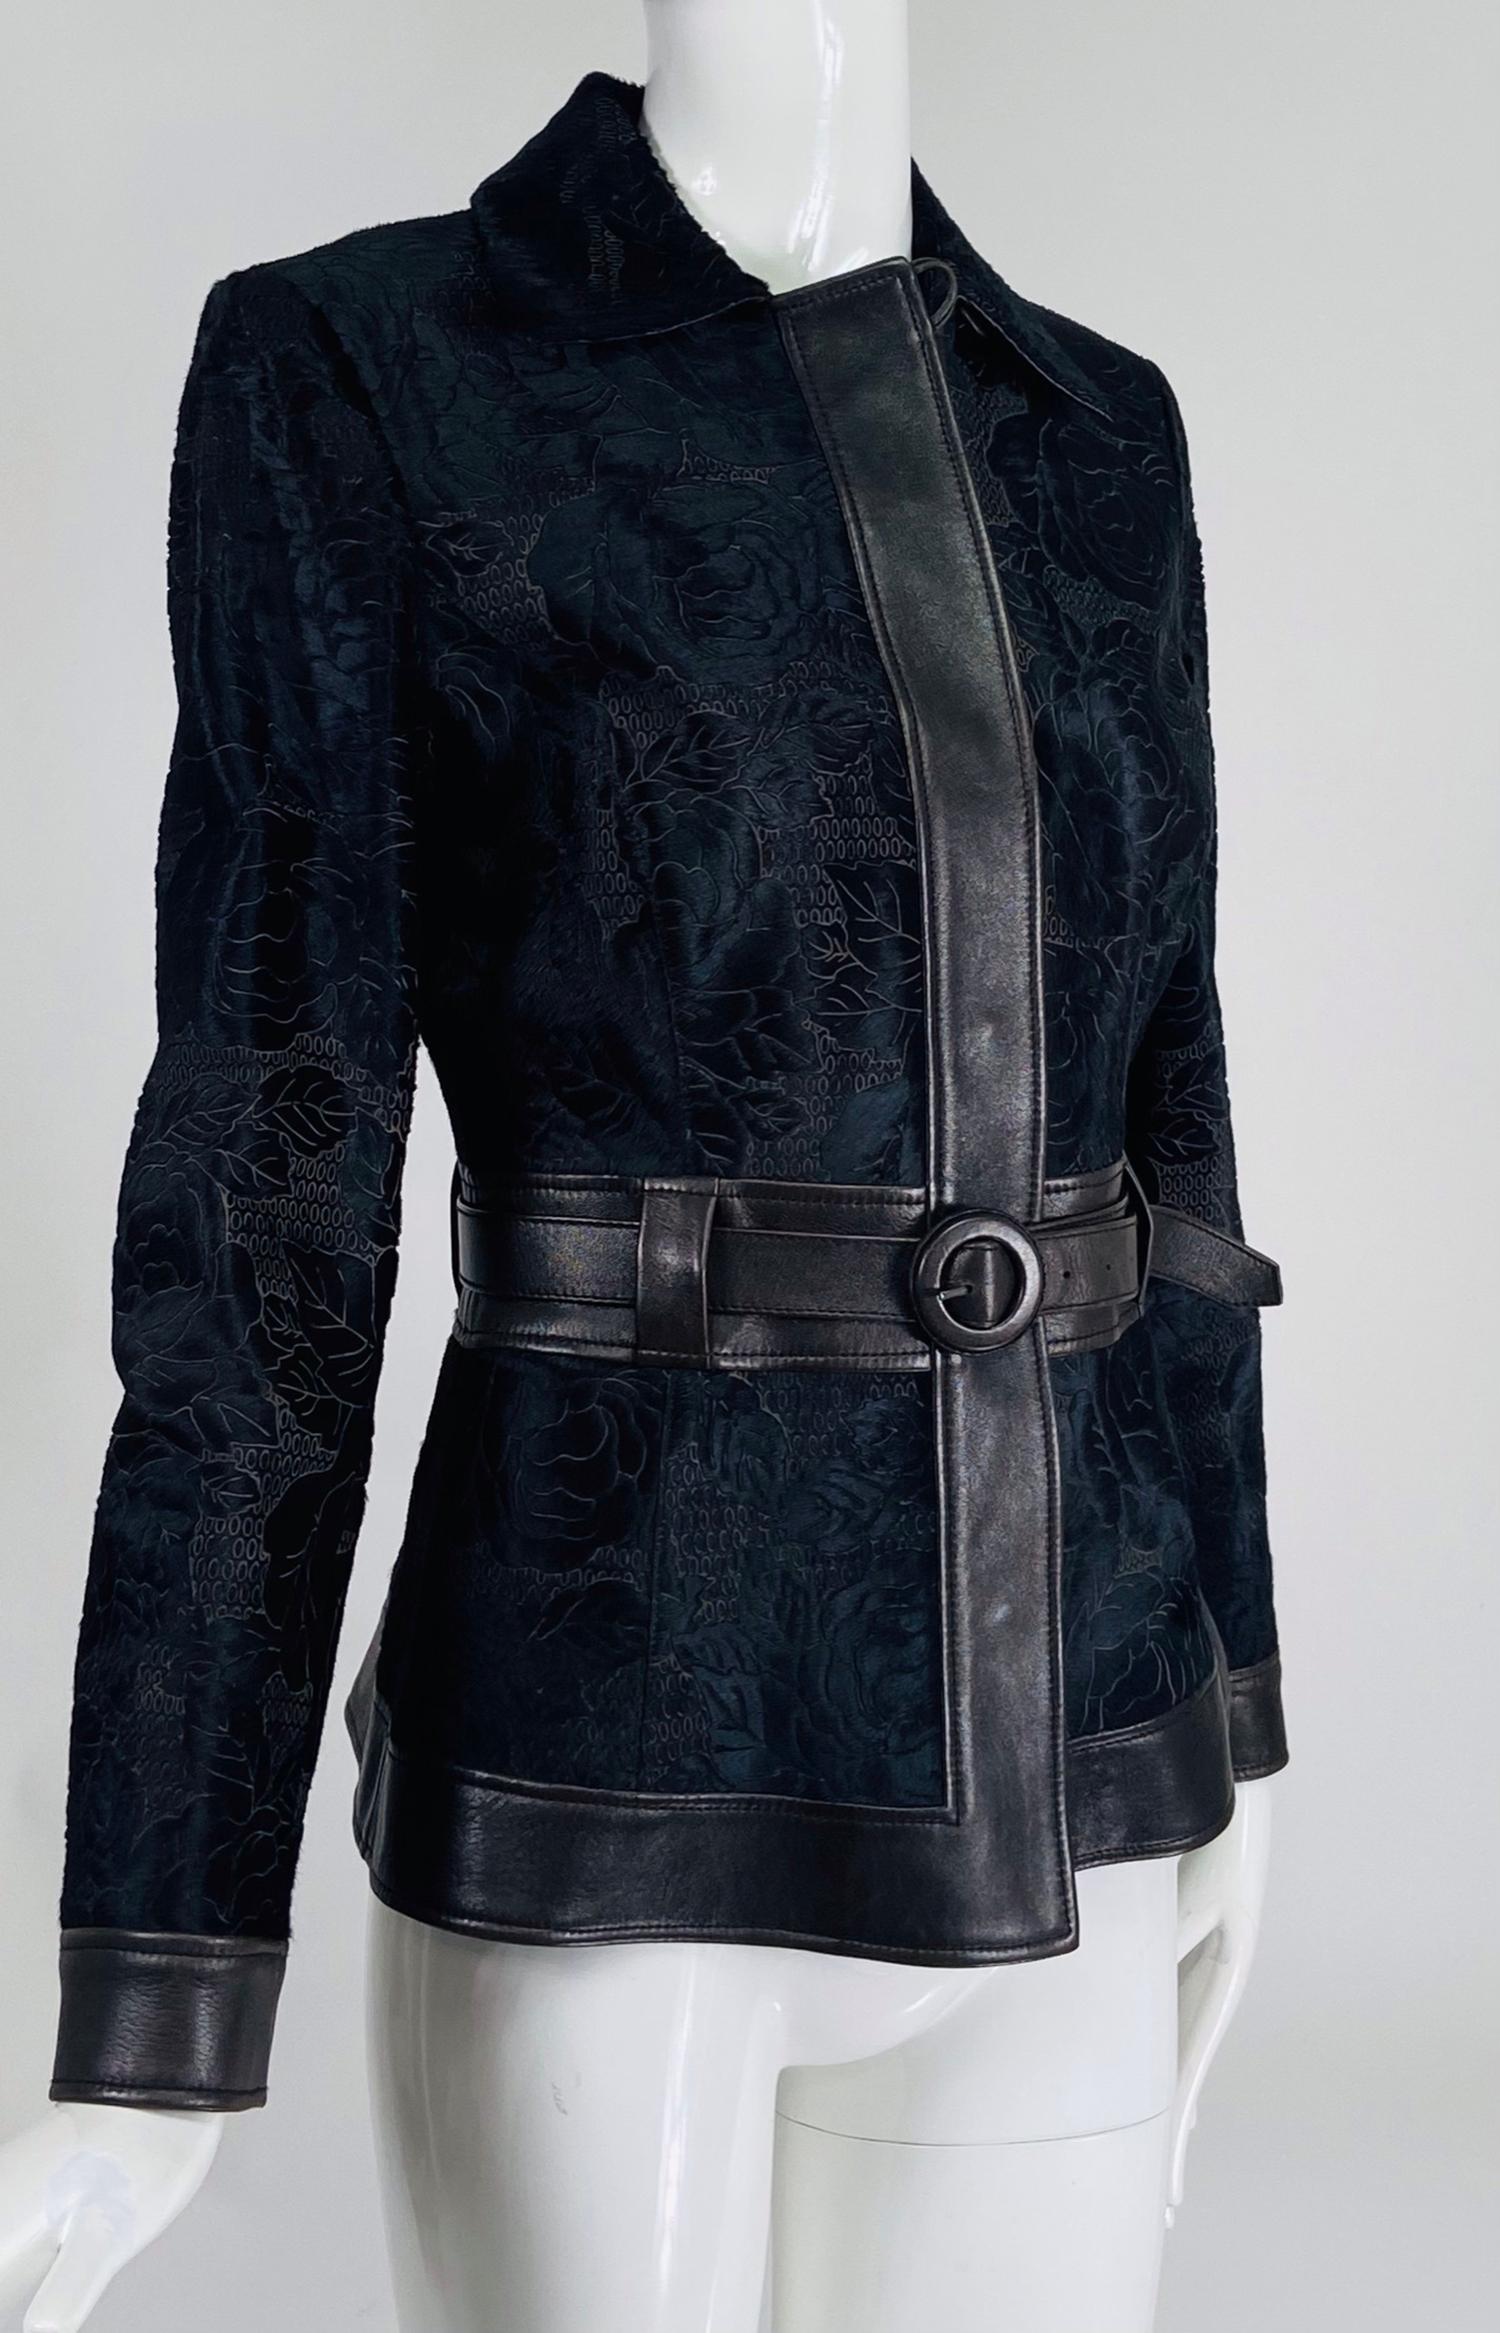 Giorgio Armani sheared lamb with leather facings in black & brown belted jacket.  This stylish jacket is created of fine sheared black lamb that is shaved in a design of  roses with leaves throughout the jacket, it shows the design in brown. The